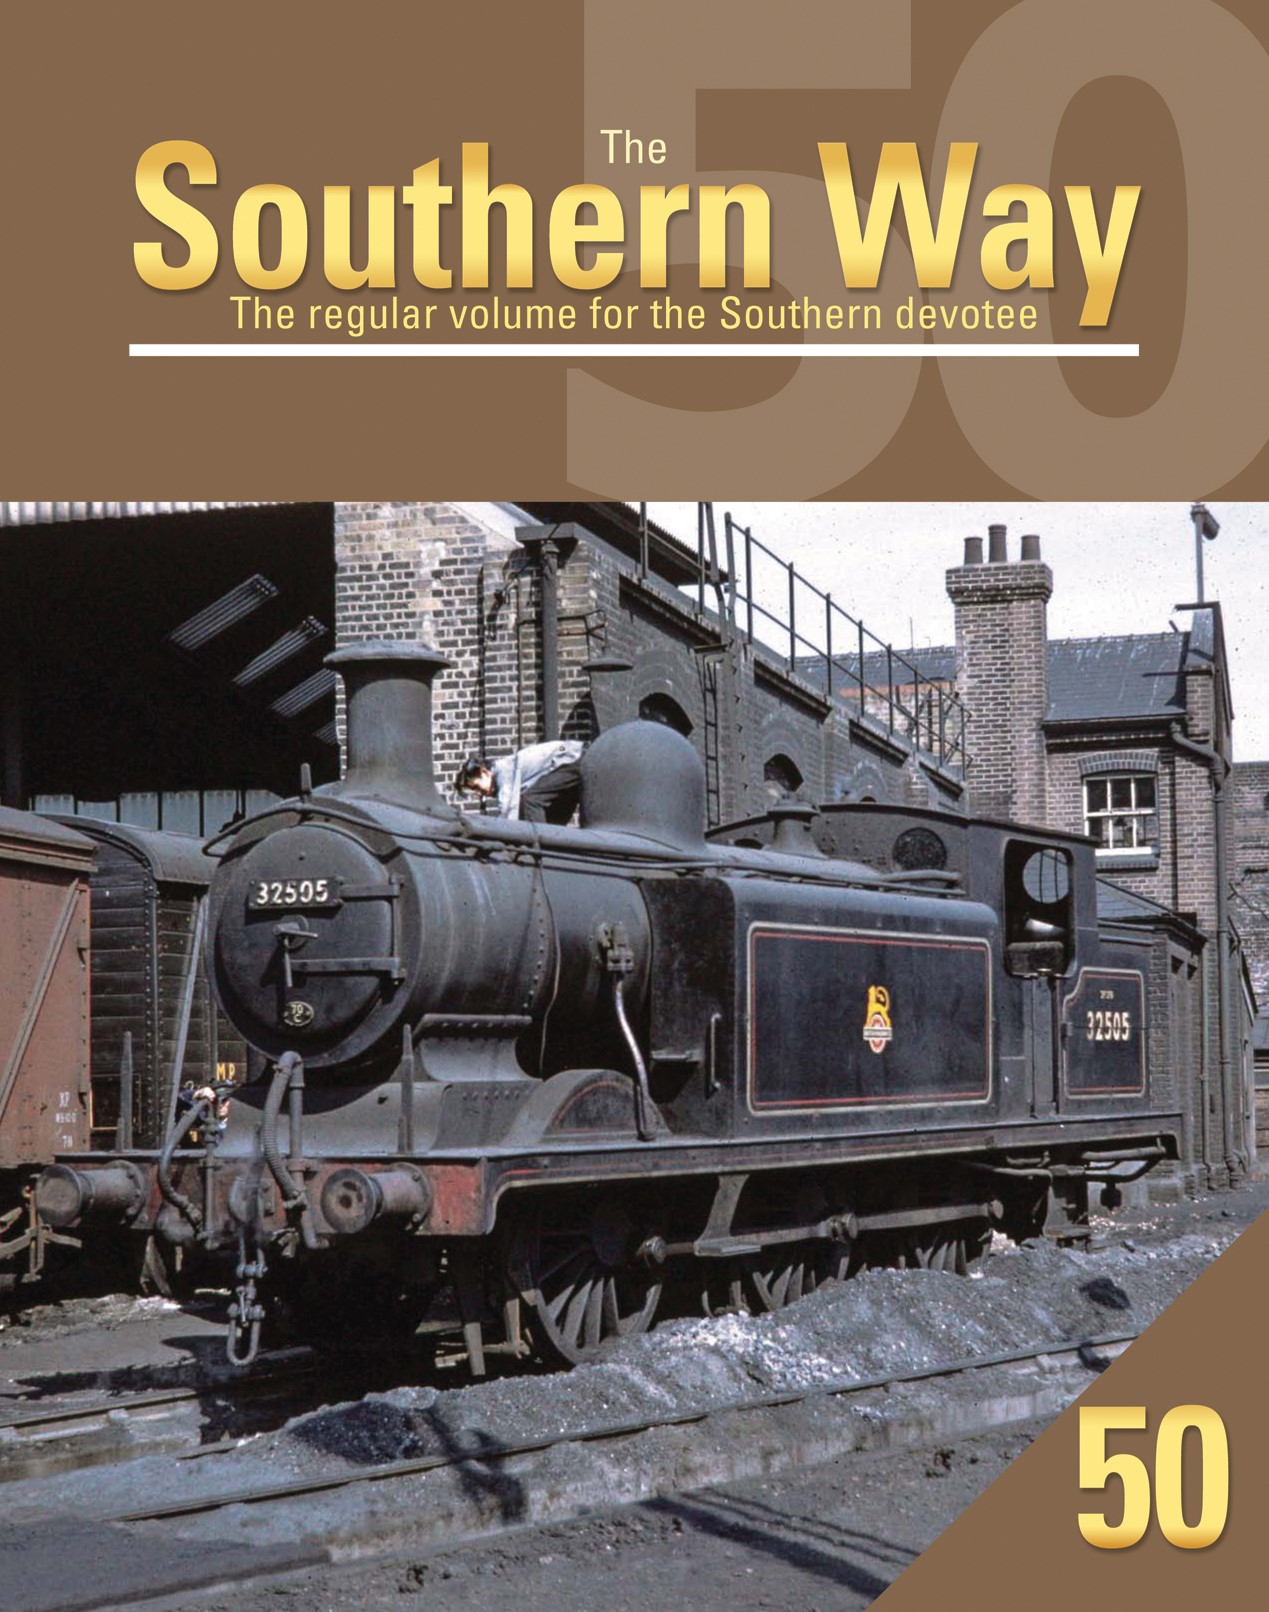 The Southern Way 50